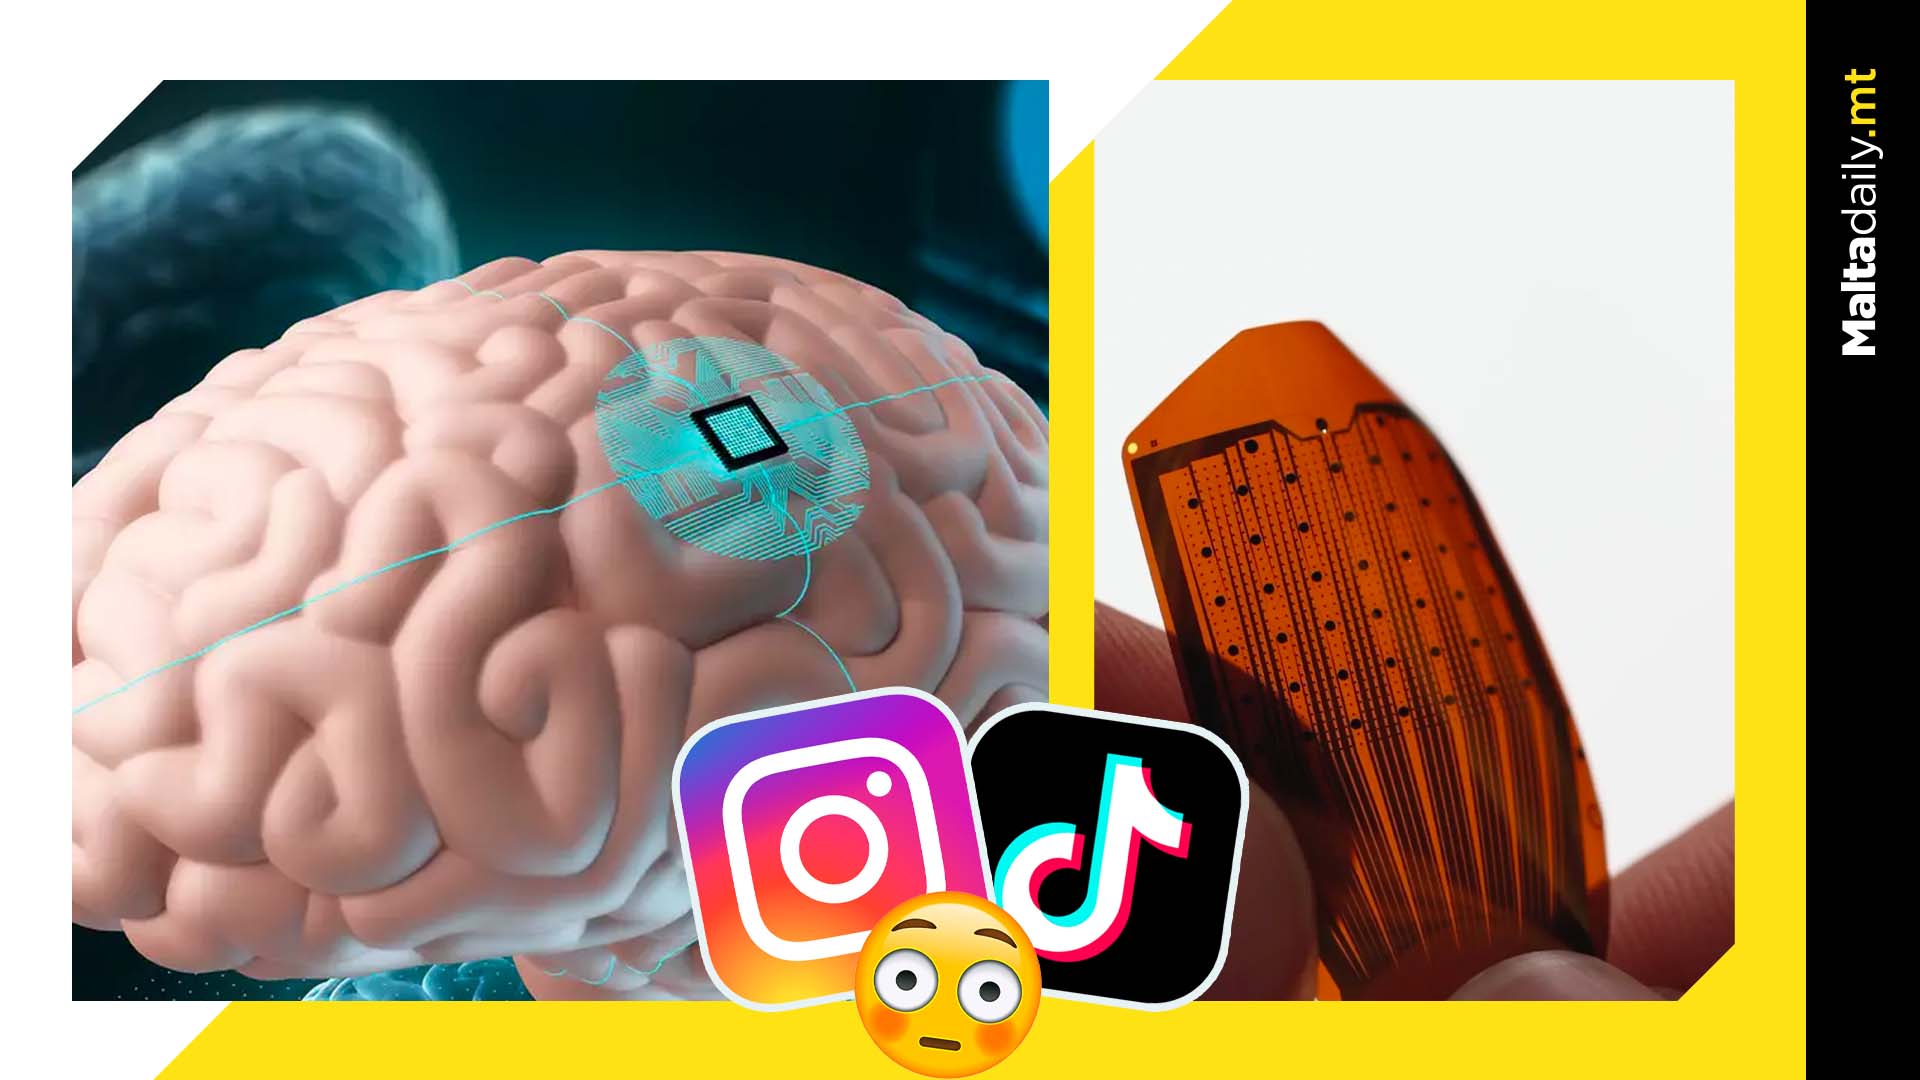 We could soon be using social media with just our minds